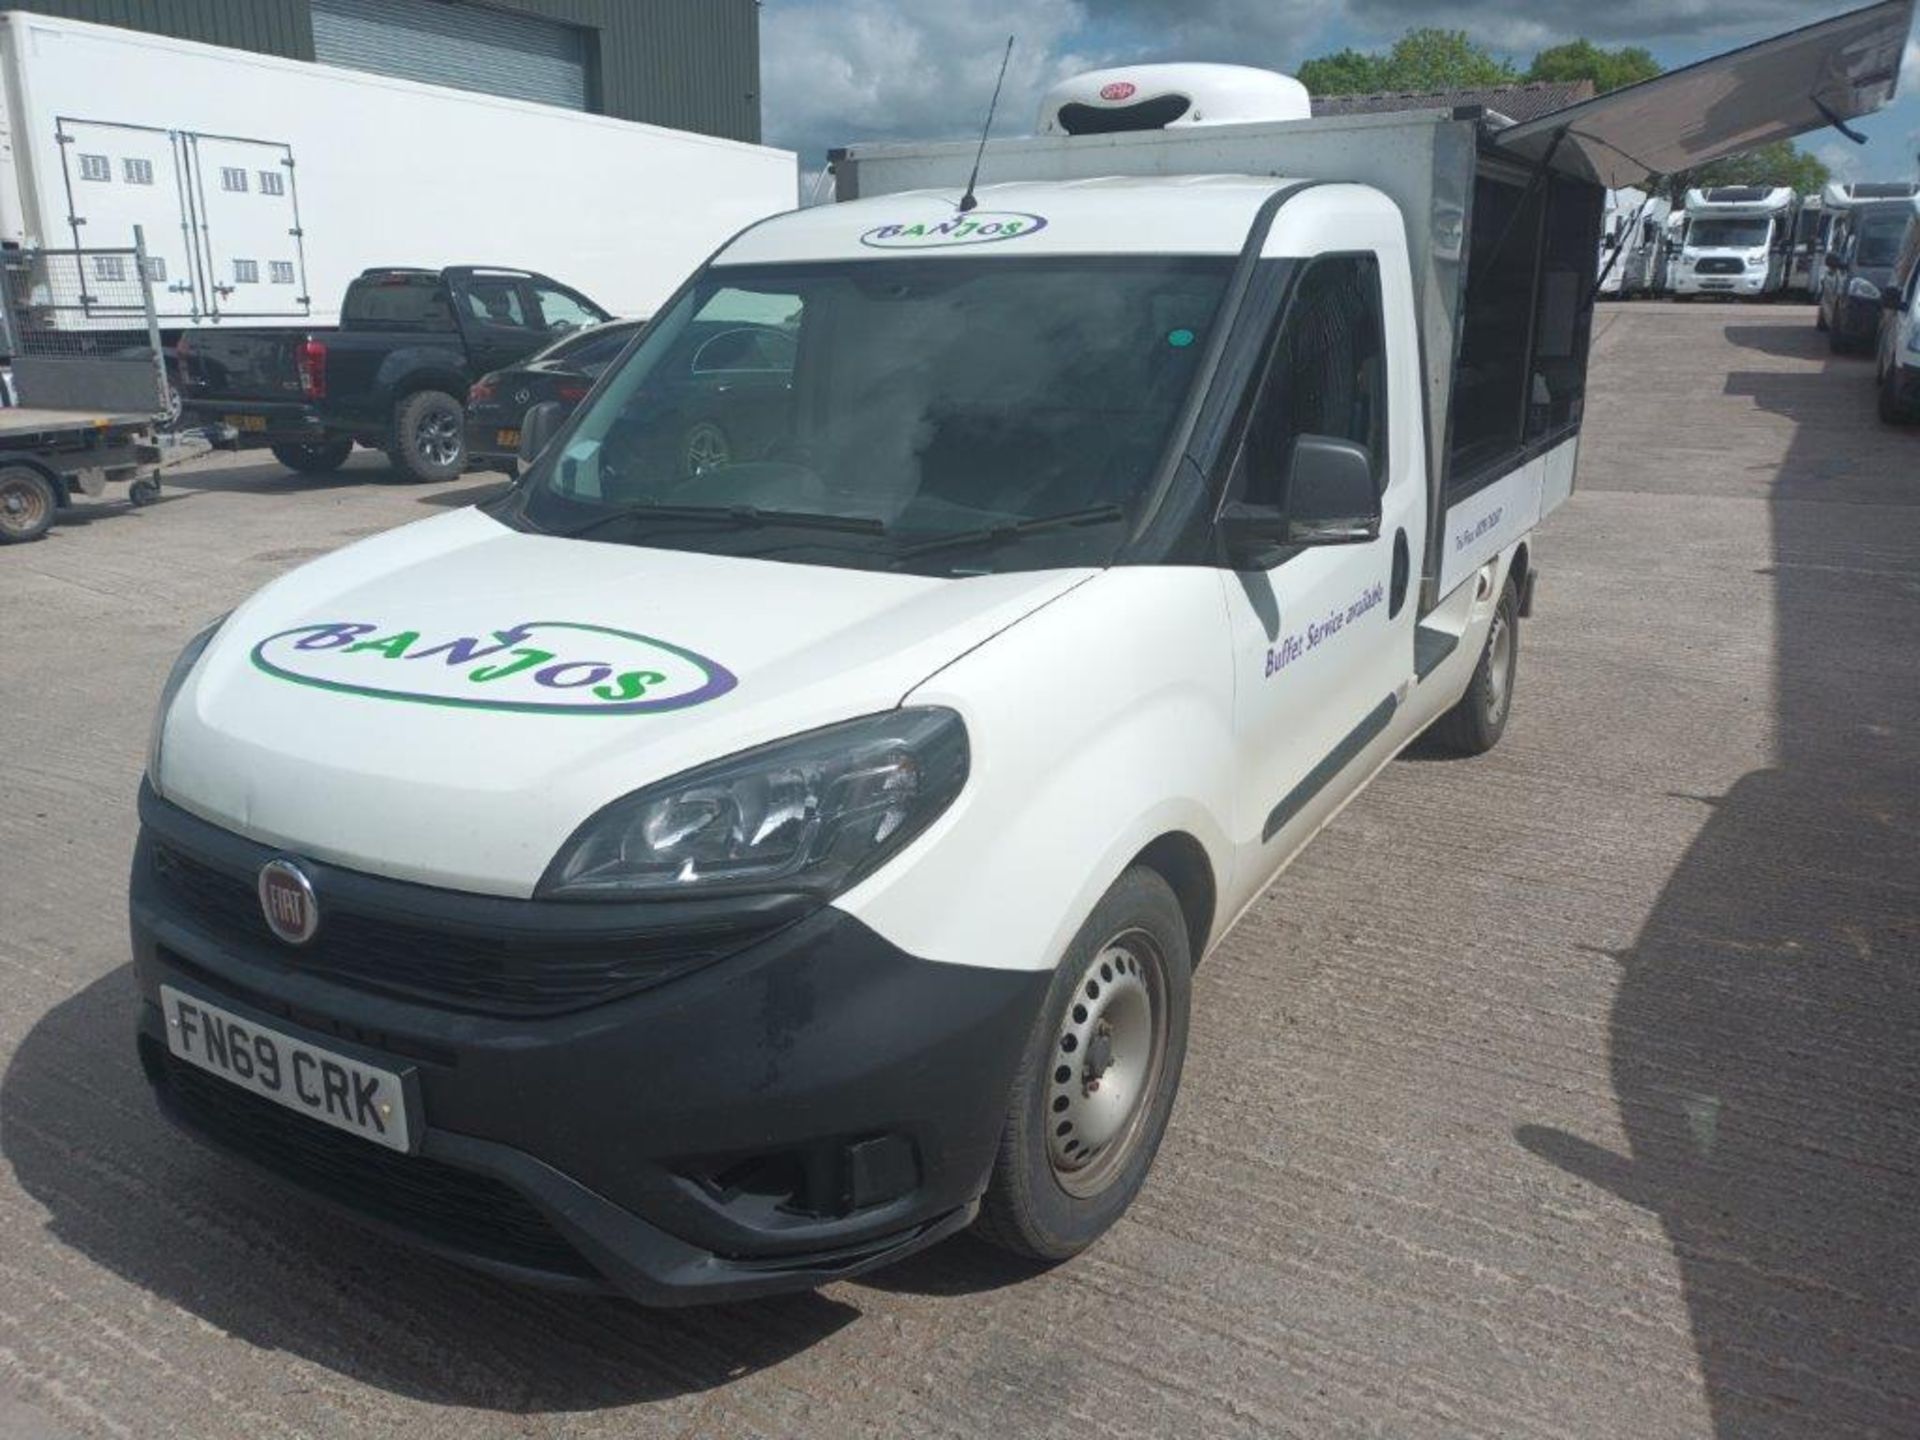 Fiat Doblo 16V MULTIJET II Optimus Primo Maxi insulated and refrigerated sandwich catering van - Image 2 of 11